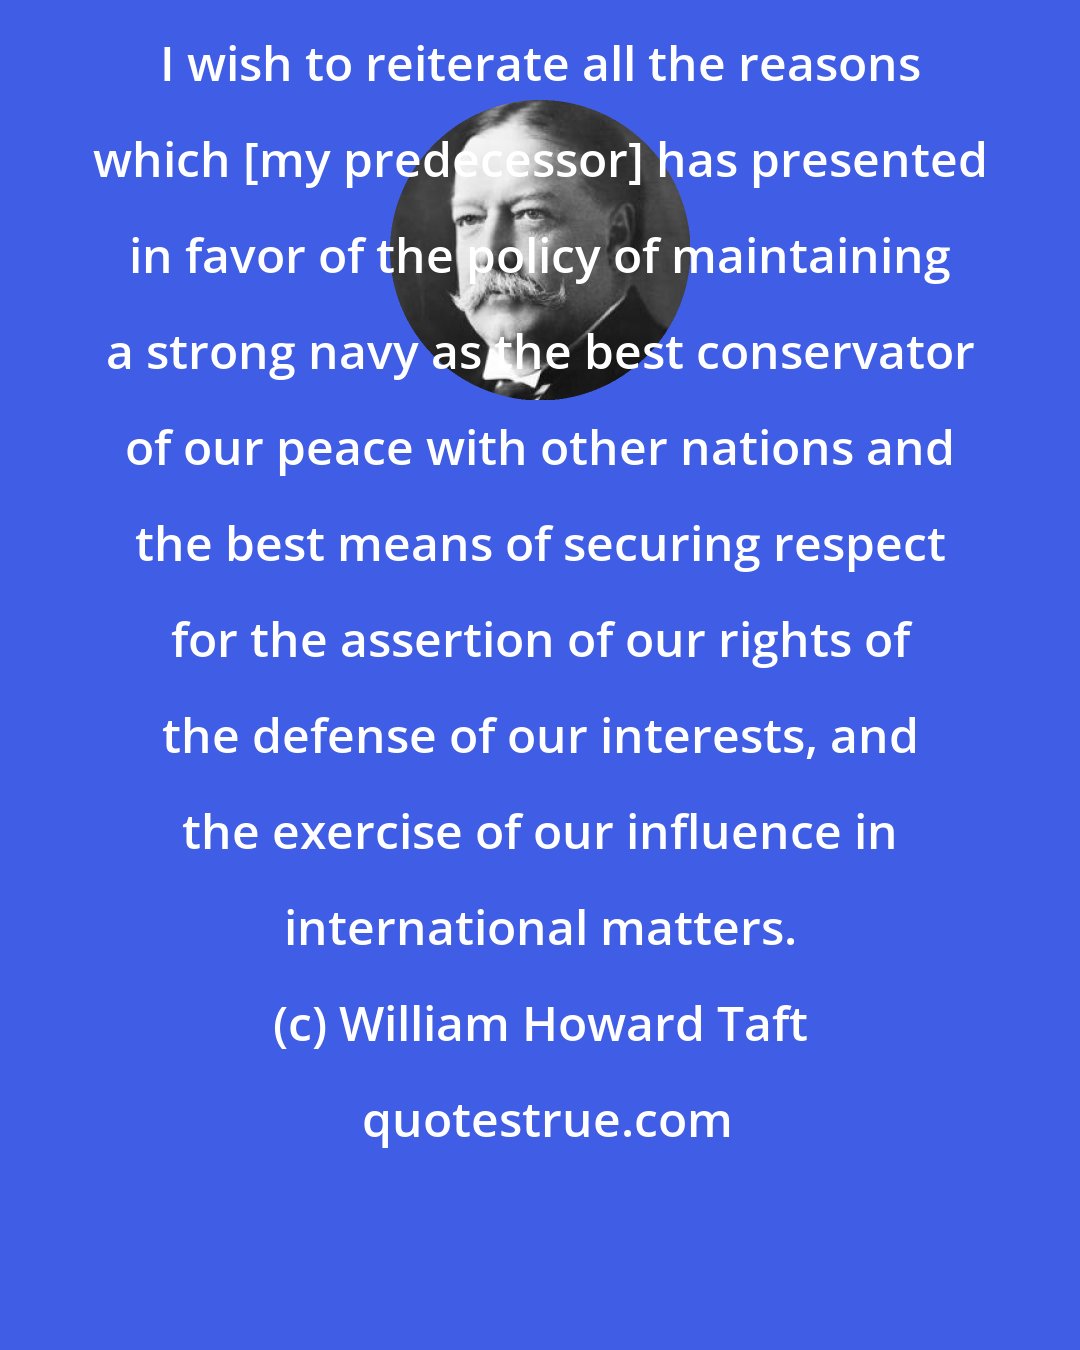 William Howard Taft: I wish to reiterate all the reasons which [my predecessor] has presented in favor of the policy of maintaining a strong navy as the best conservator of our peace with other nations and the best means of securing respect for the assertion of our rights of the defense of our interests, and the exercise of our influence in international matters.